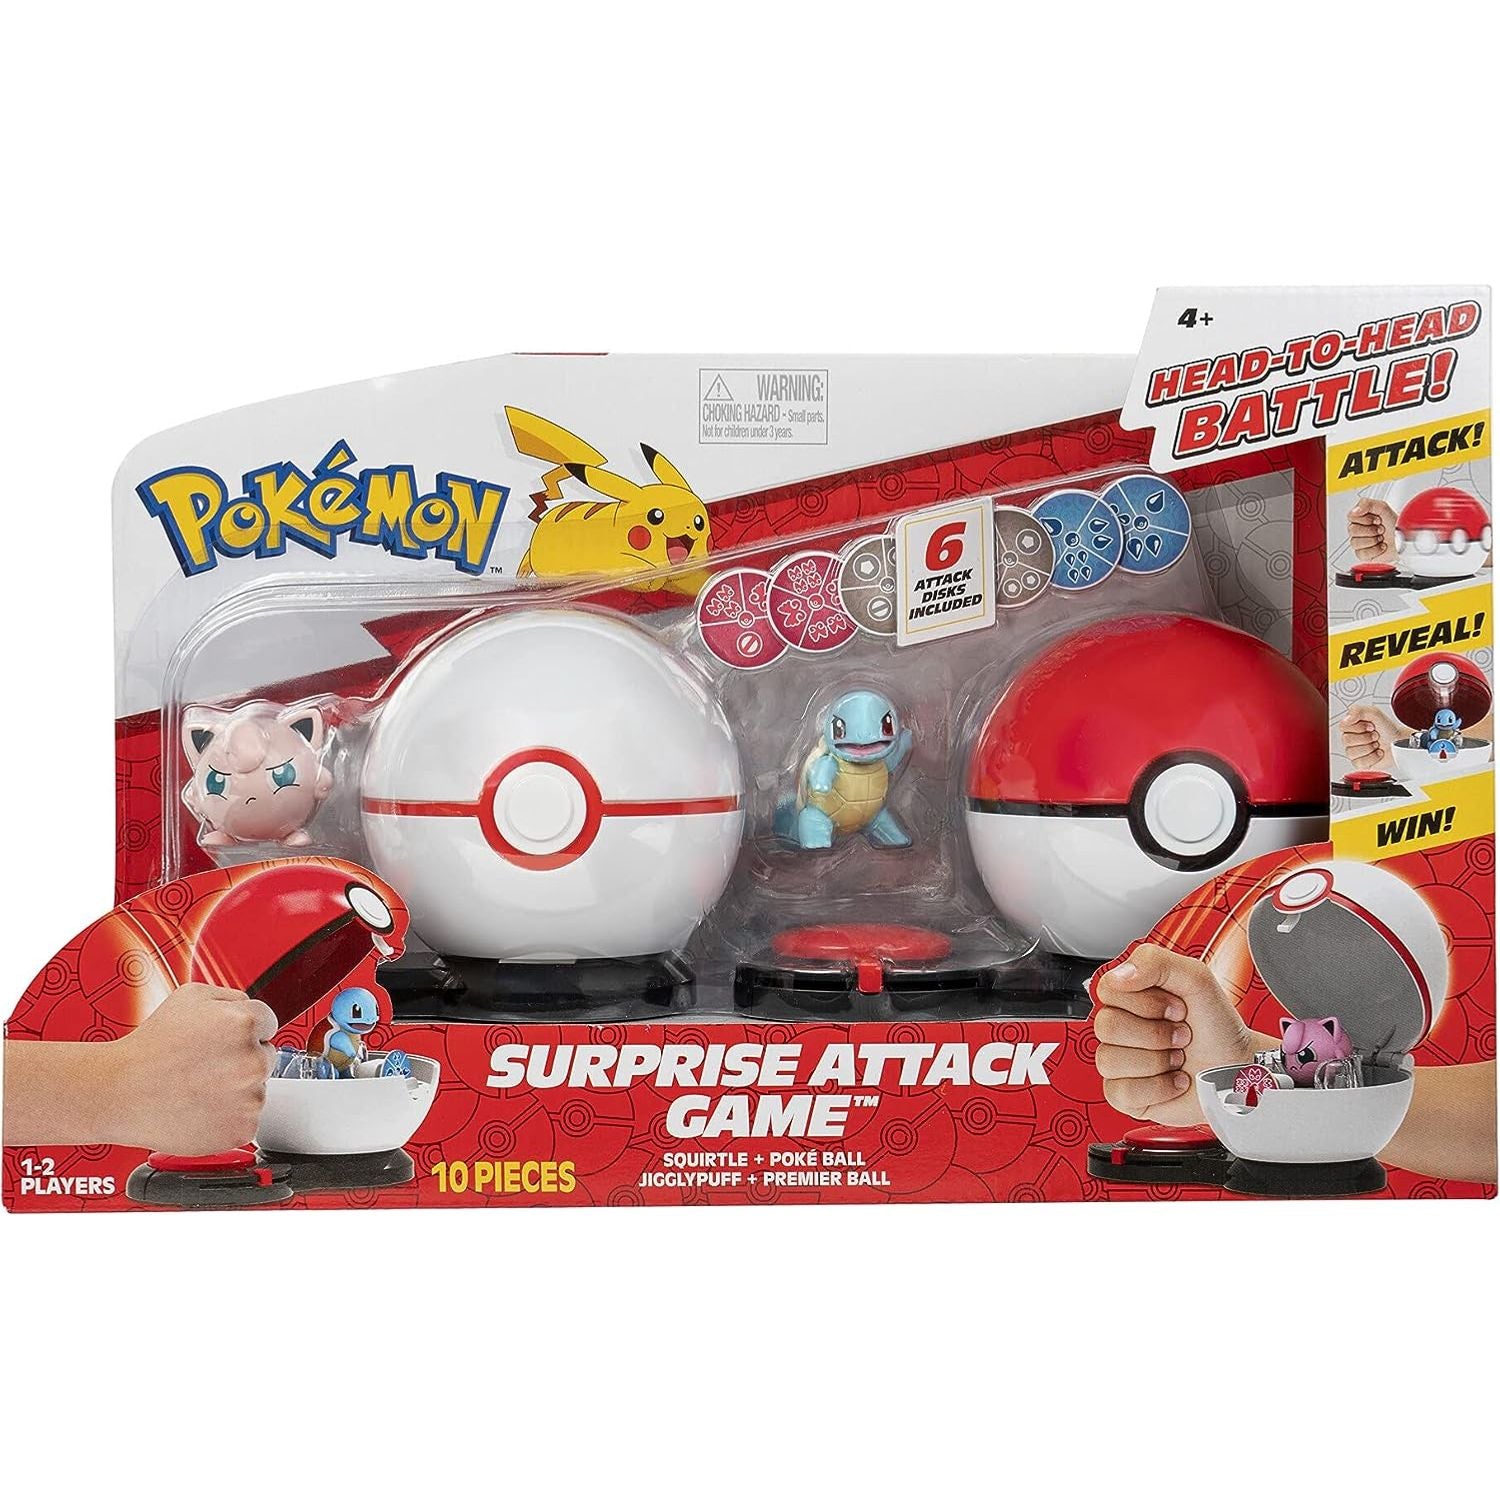 Pokemon Surprise Attack Game, Featuring Squirtle and Jigglypuff - 2 Surprise Attack Balls - 6 Attack Disks